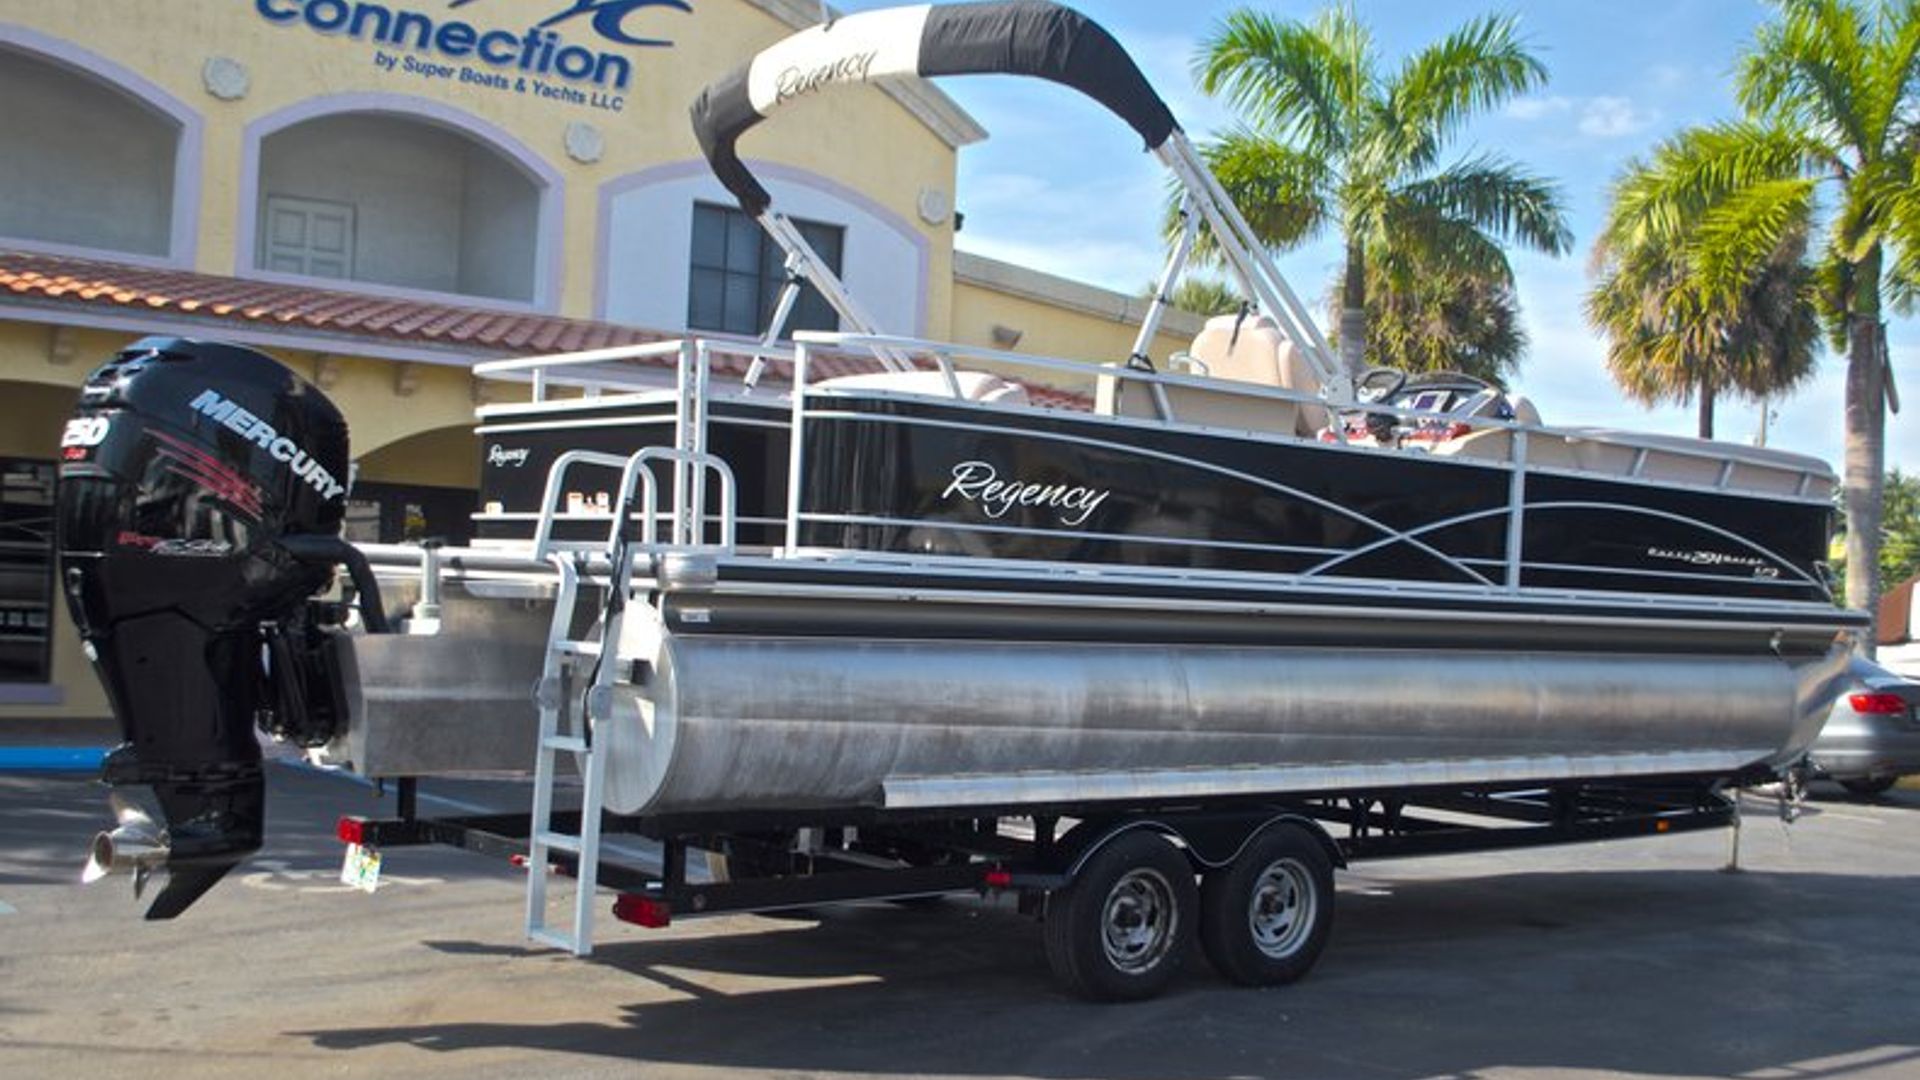 Used 2014 Regency Party Barge 254 XP3 #8806 image 14